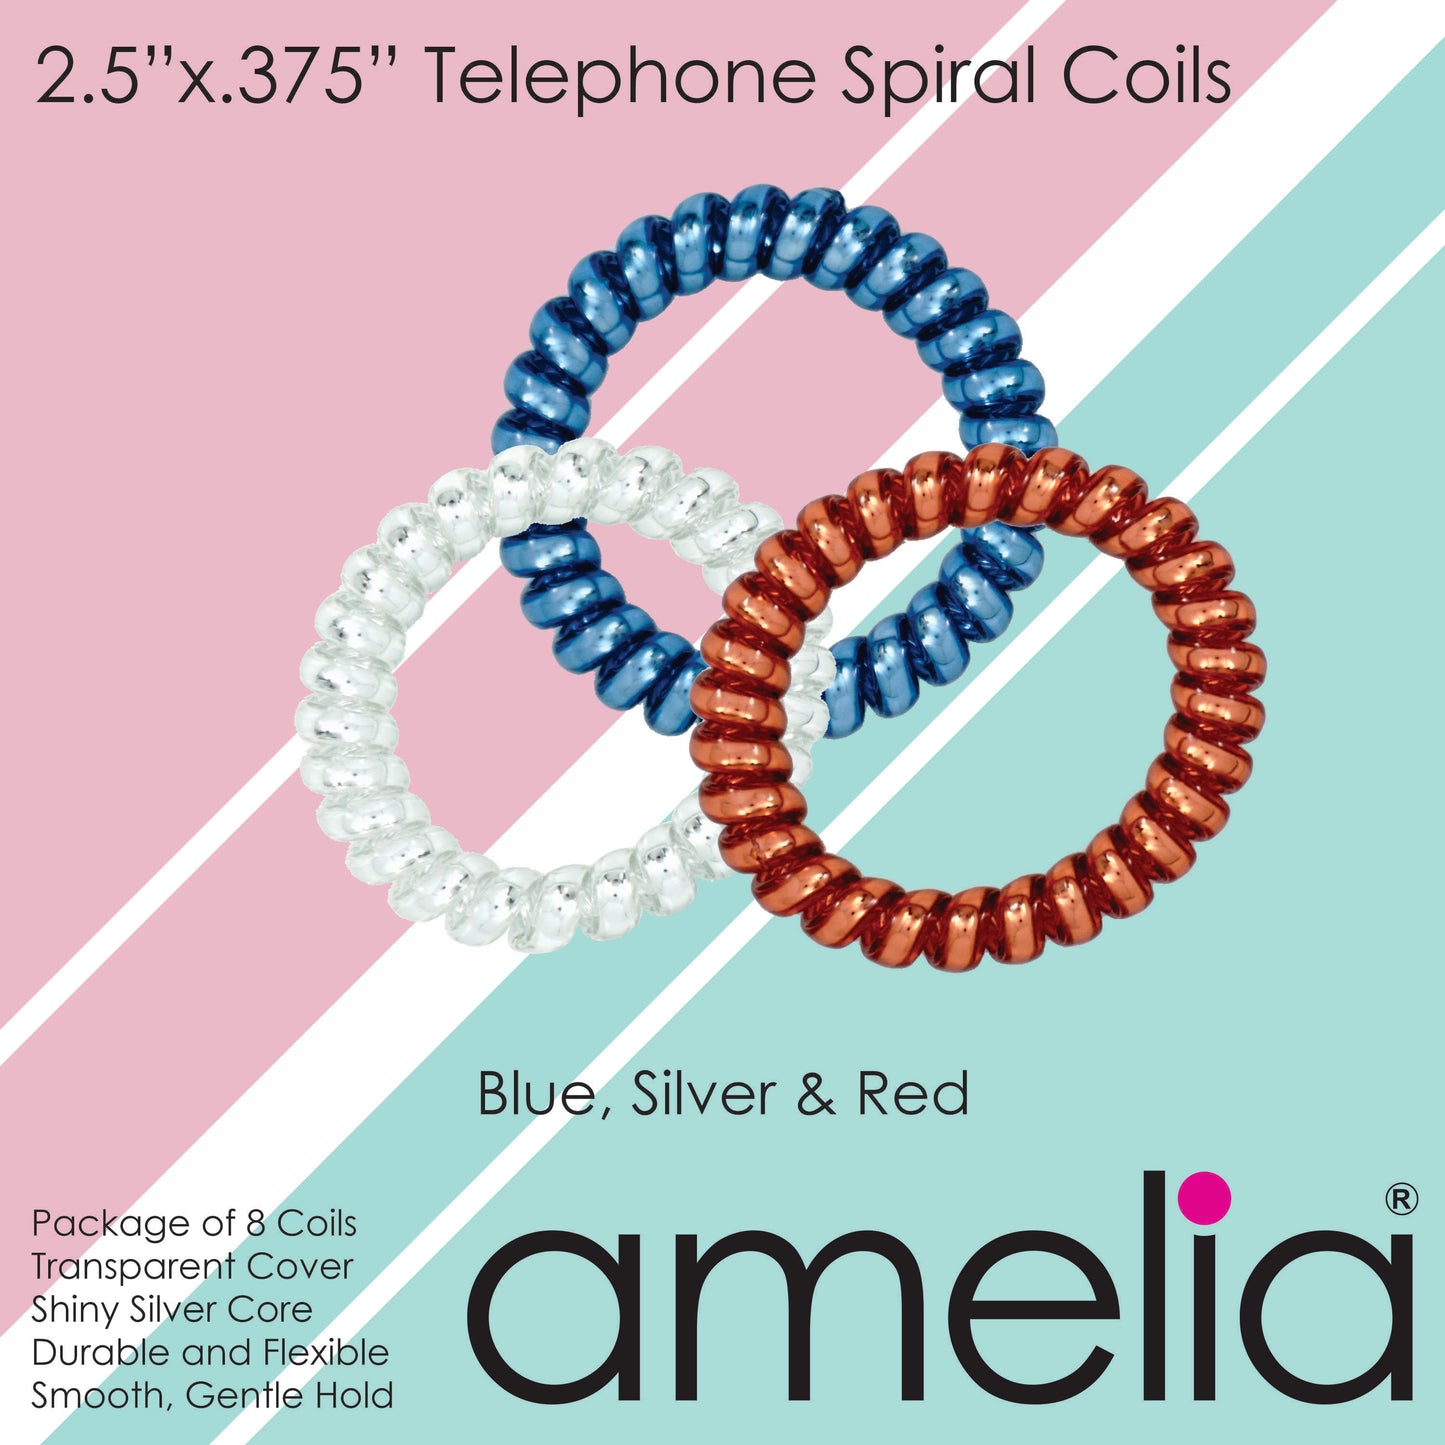 Amelia Beauty Products 8 Large Smooth Shiny Center Elastic Hair Coils, 2. 5in Diameter Thick Spiral Hair Ties, Gentle on Hair, Strong Hold and Minimizes Dents and Creases, Blue, Silver and Red Mix